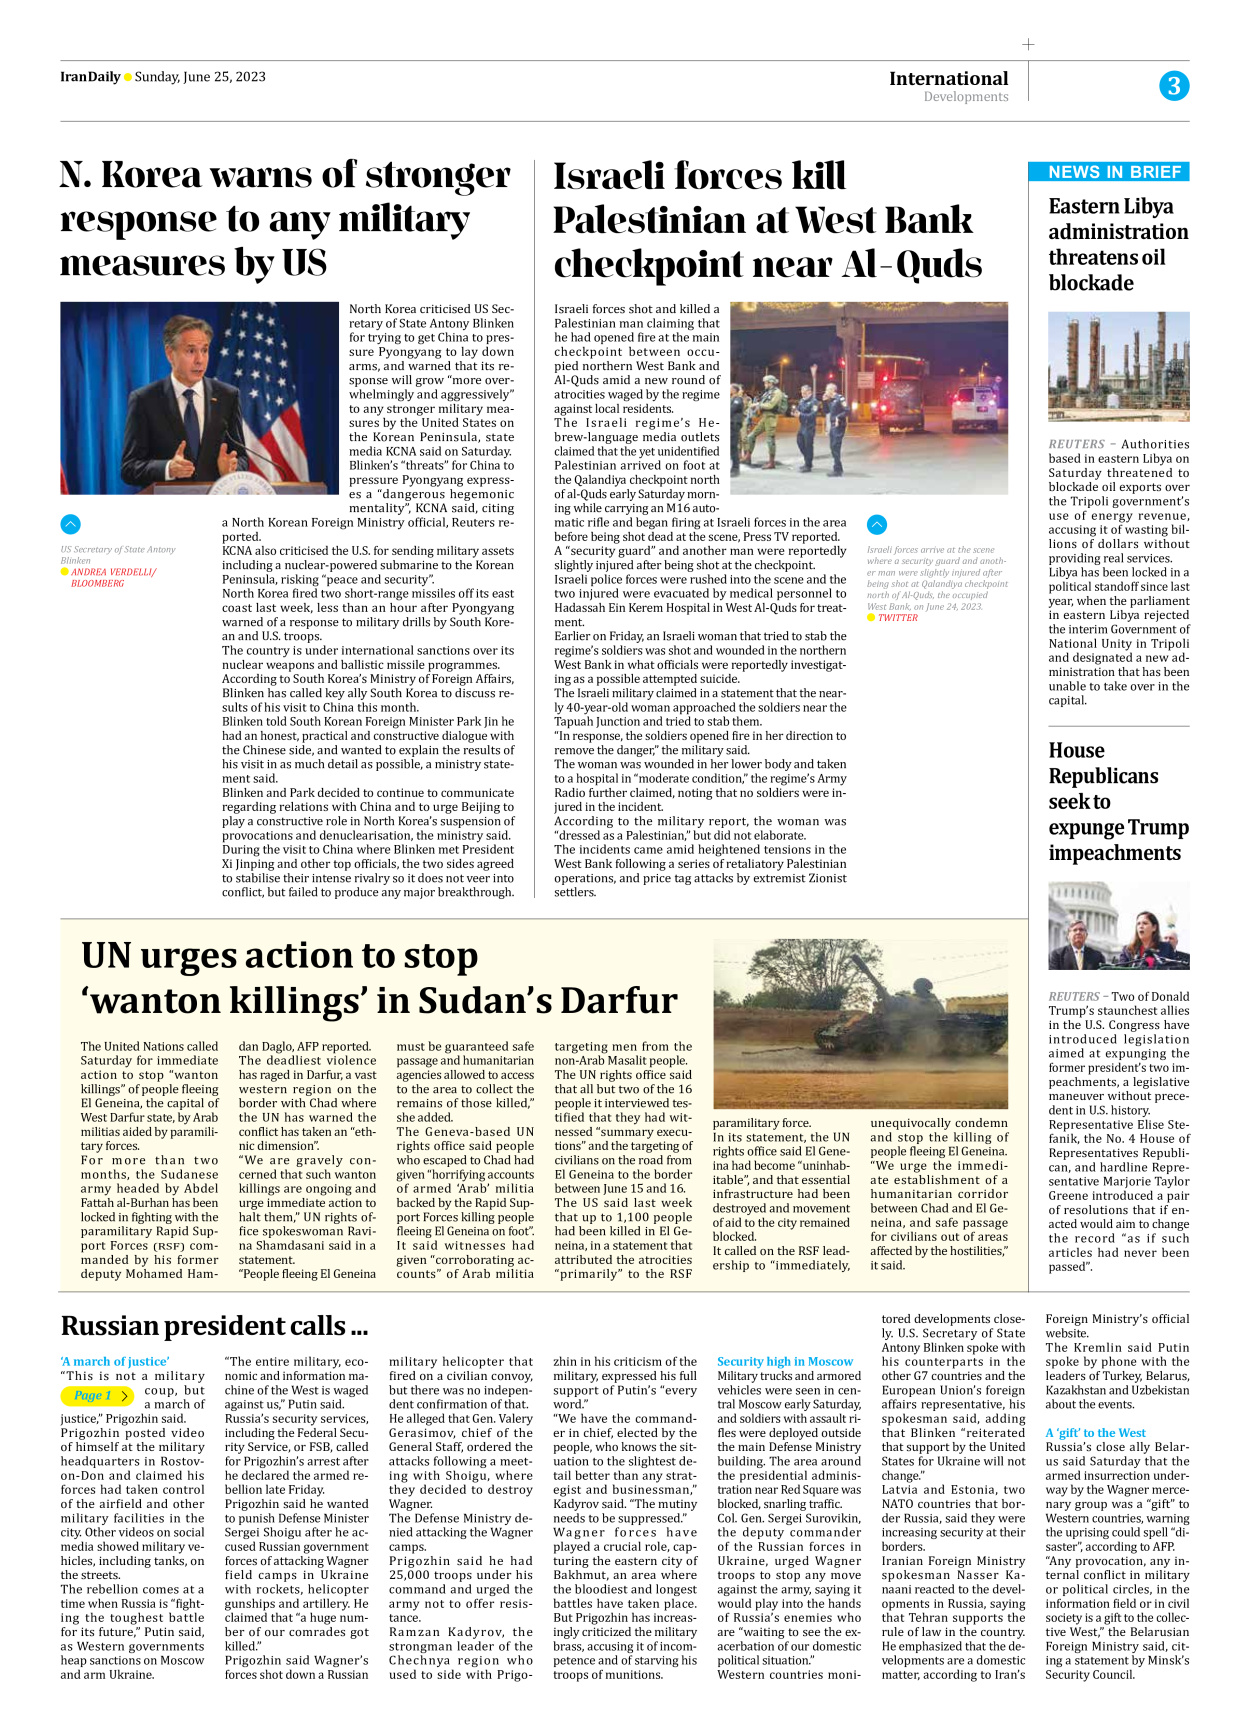 Iran Daily - Number Seven Thousand Three Hundred and Twenty Three - 25 June 2023 - Page 3